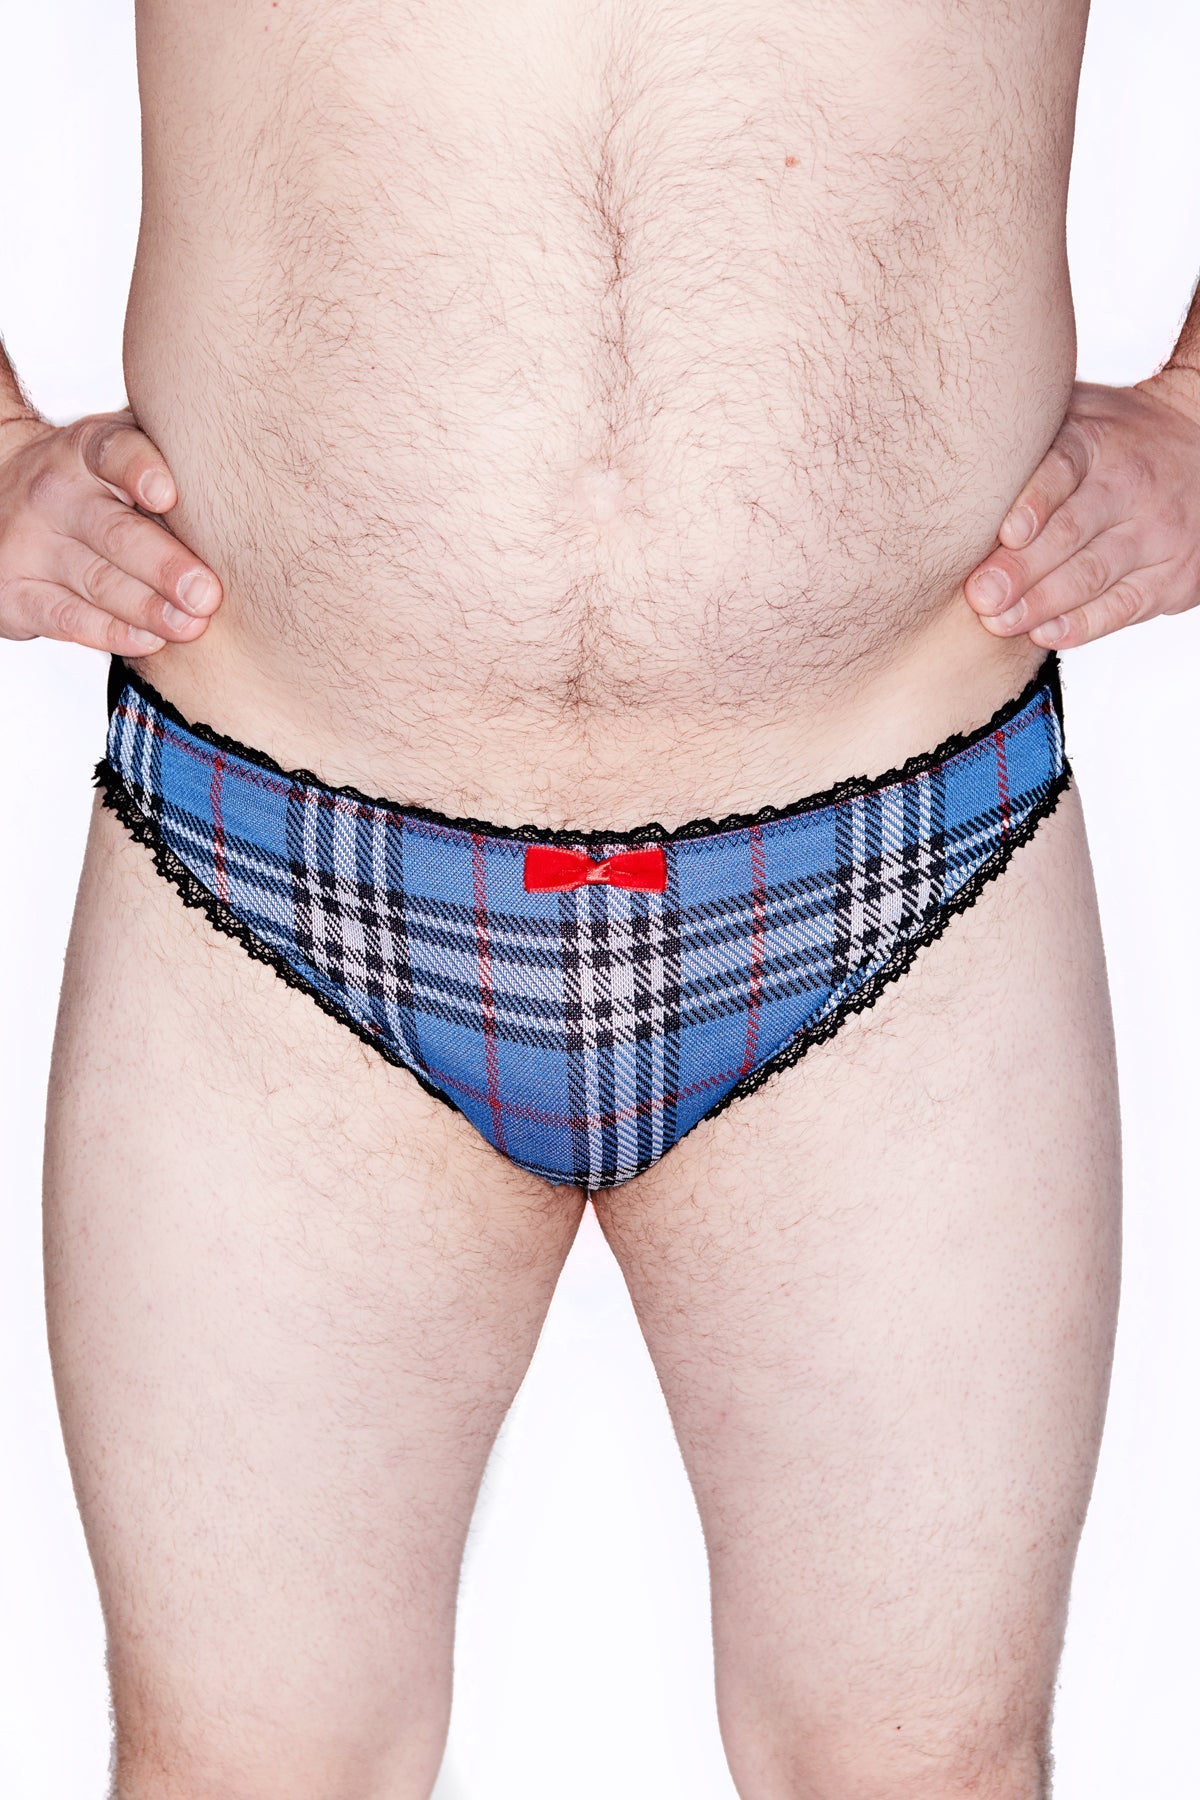 Mens Blue Plaid Lace back Brief. Crafted from soft ponte plaid and cotton with a luxurious rose lace back for a timeless, sophisticated look. Detailing includes ruffle elastic and velvet center bow. 